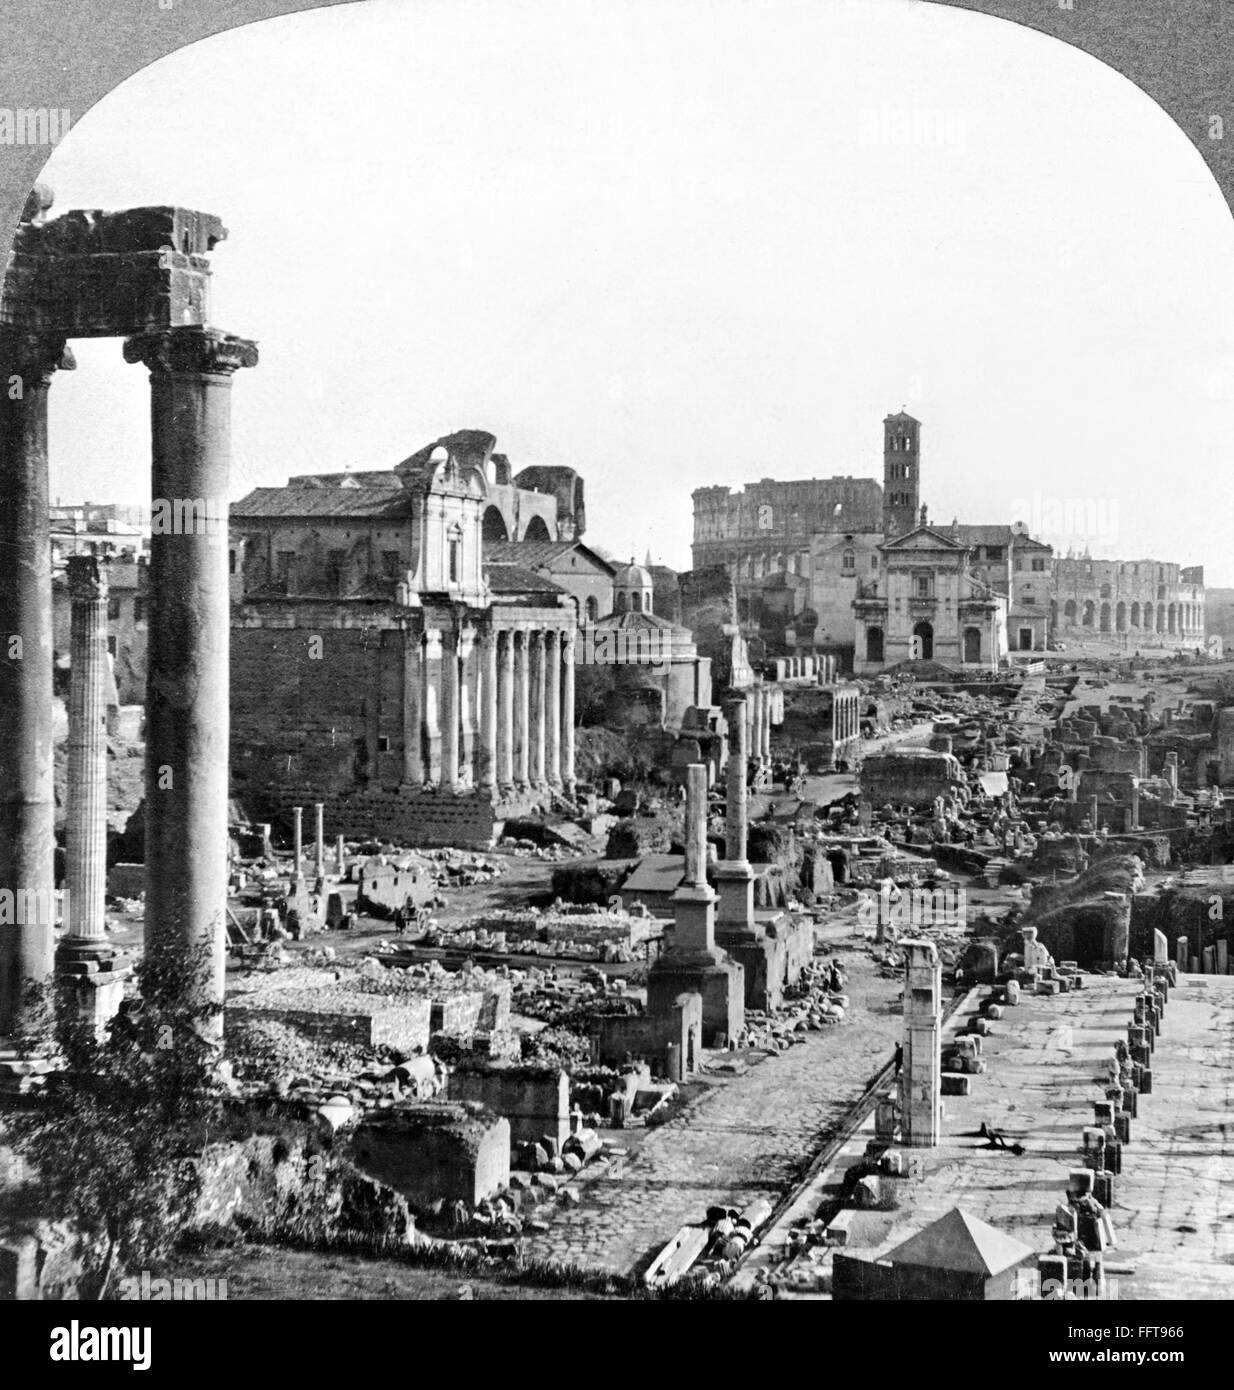 ROME: FORUM, c1906. /nA view of the ruins of the Forum and the Colosseum (rear) in Rome, Italy. Stereograph, c1906. Stock Photo